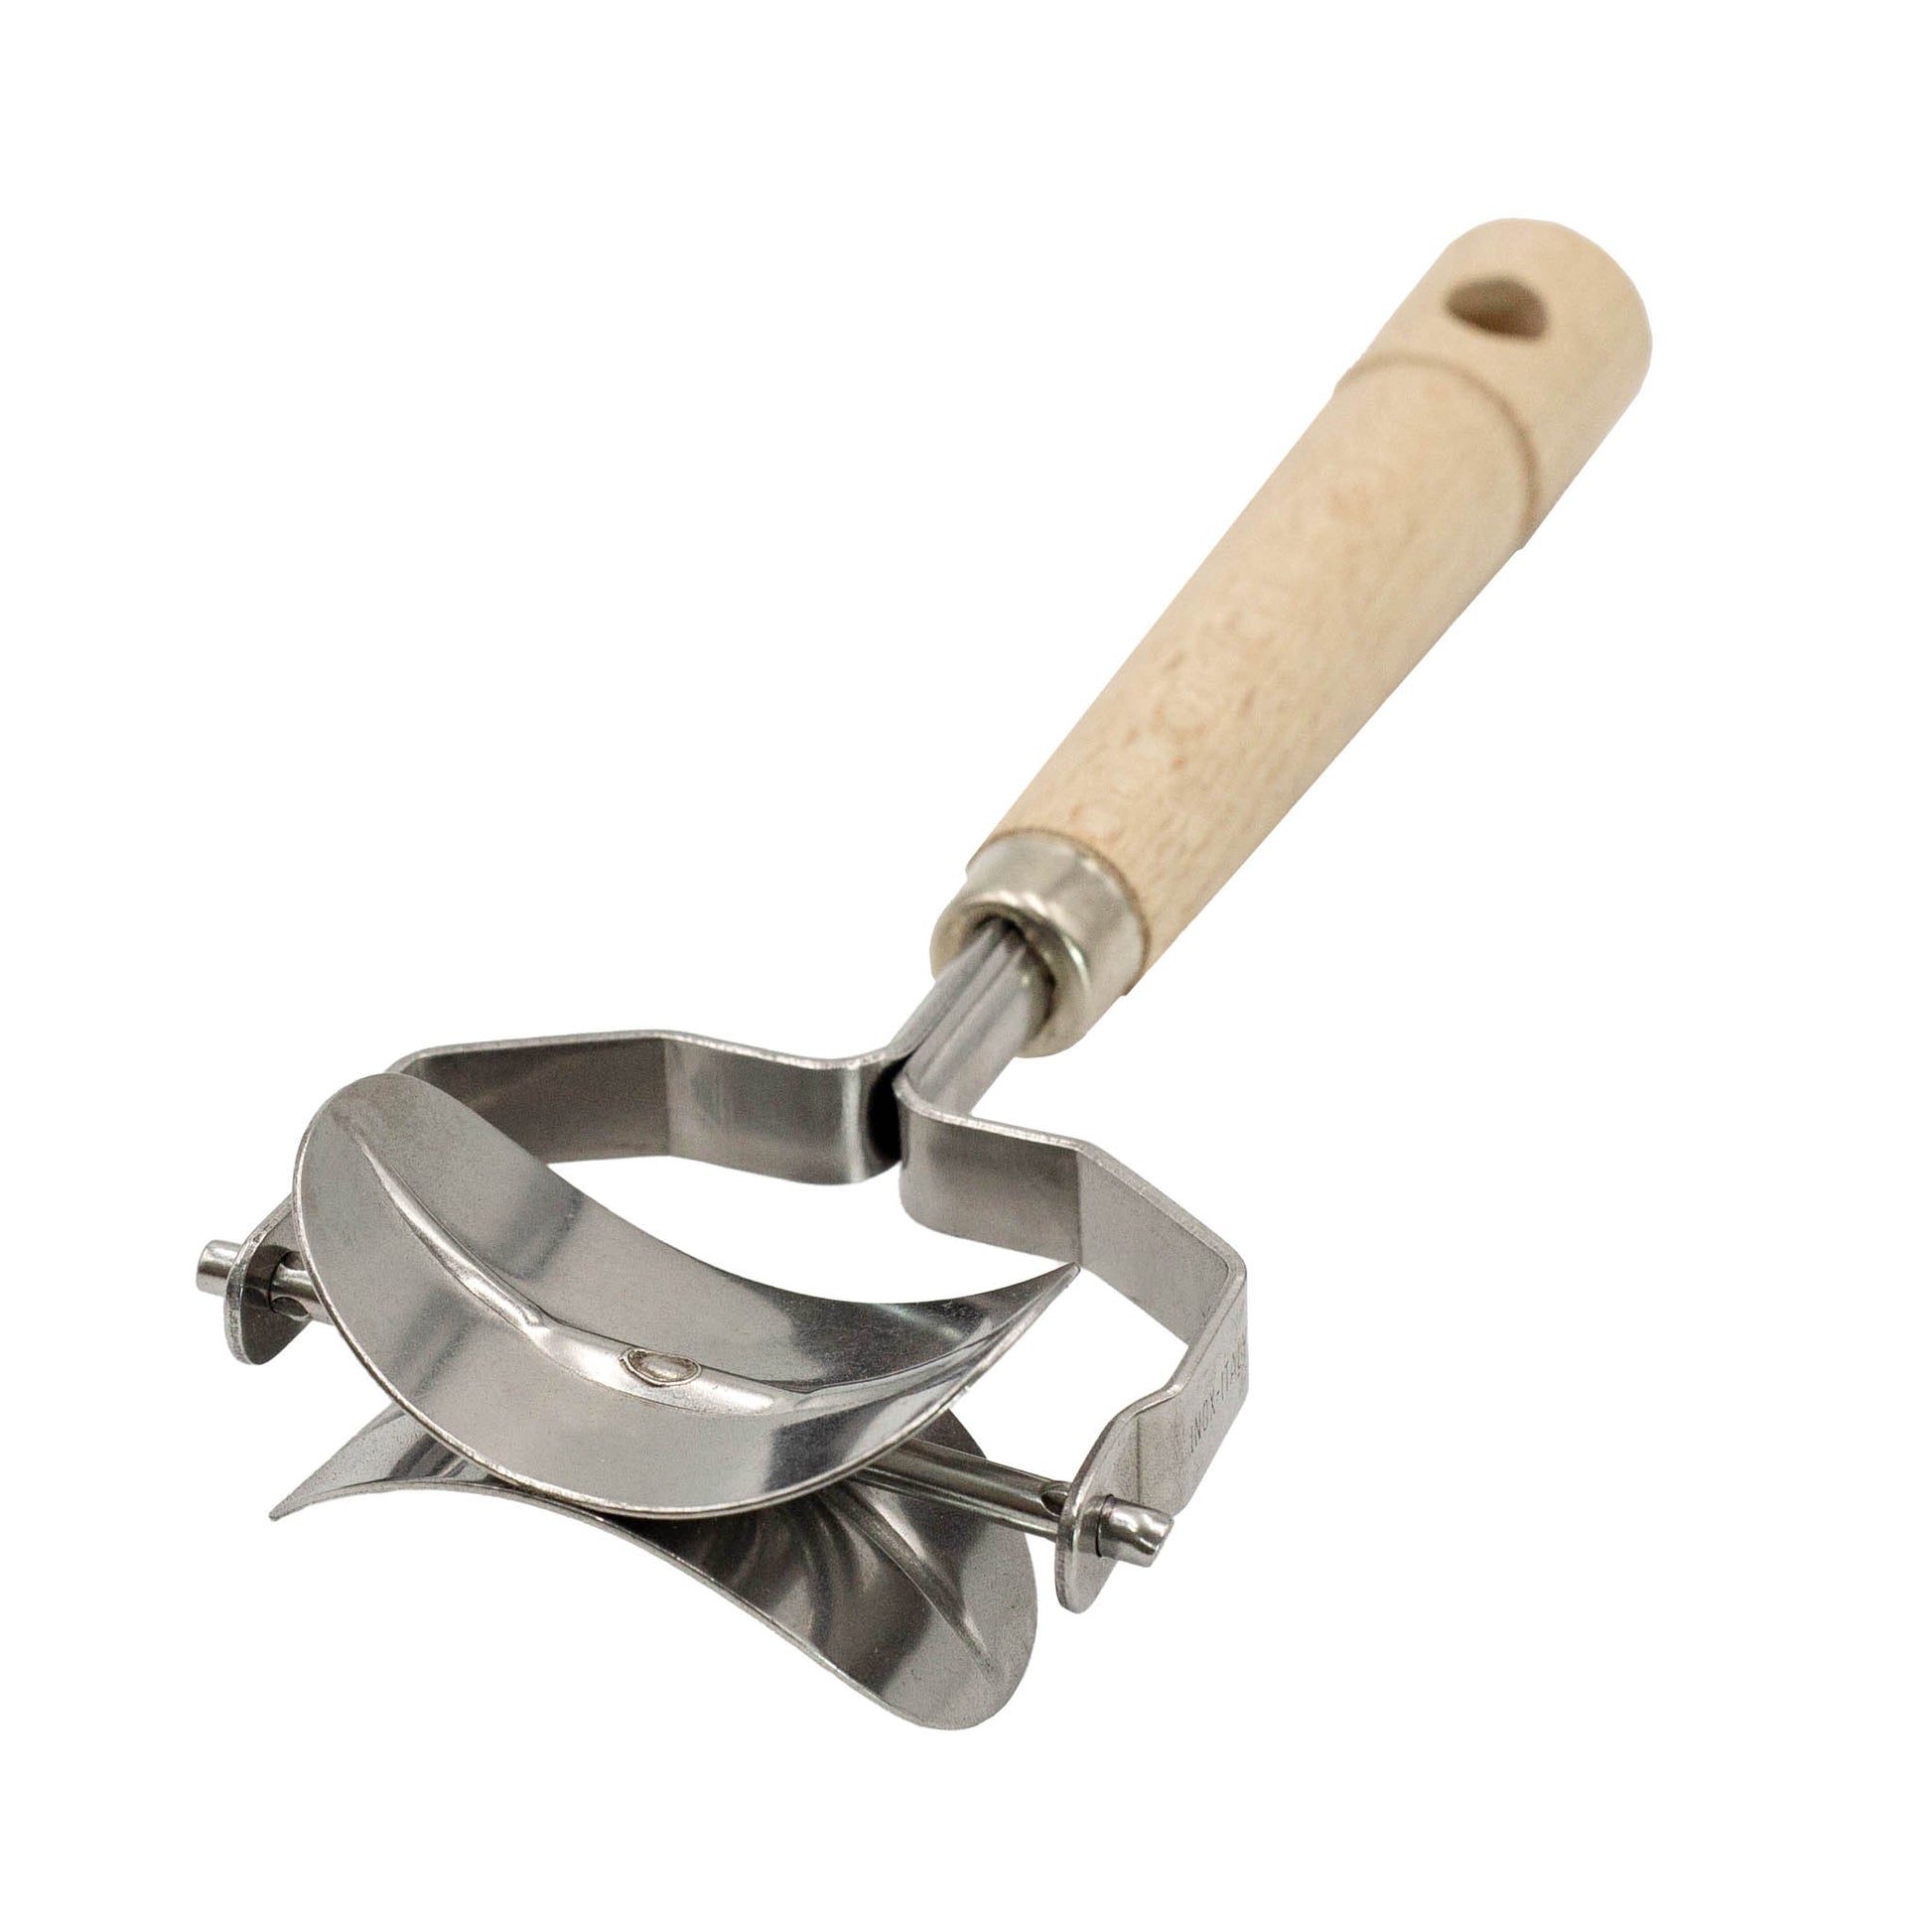 Italian Made large oval tortellini cutter with wooden handle.